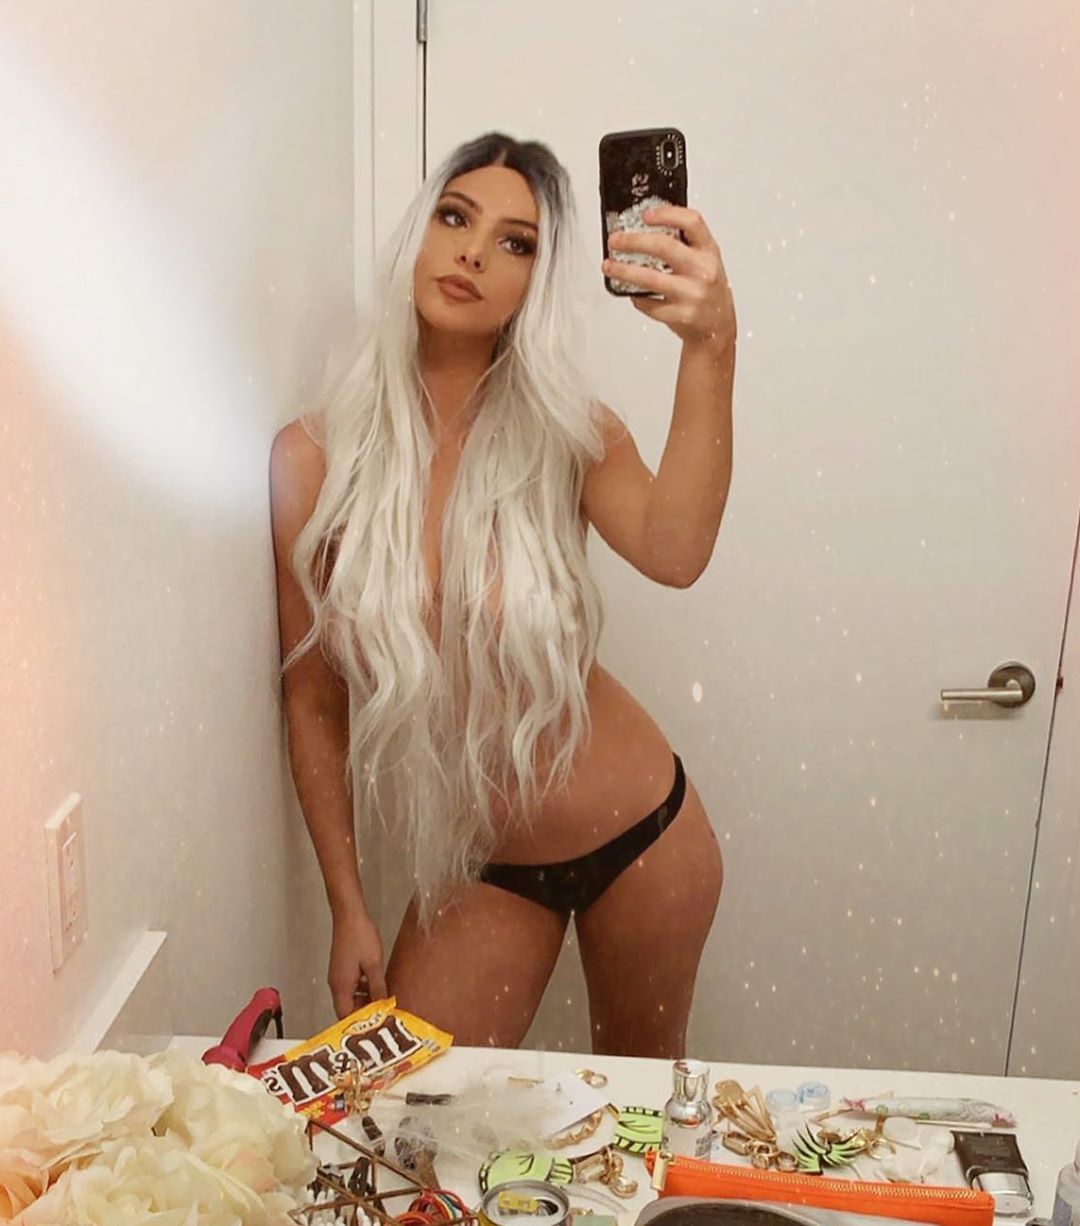 Lele Pons topless new photo in just panties with her hair covering her nude...